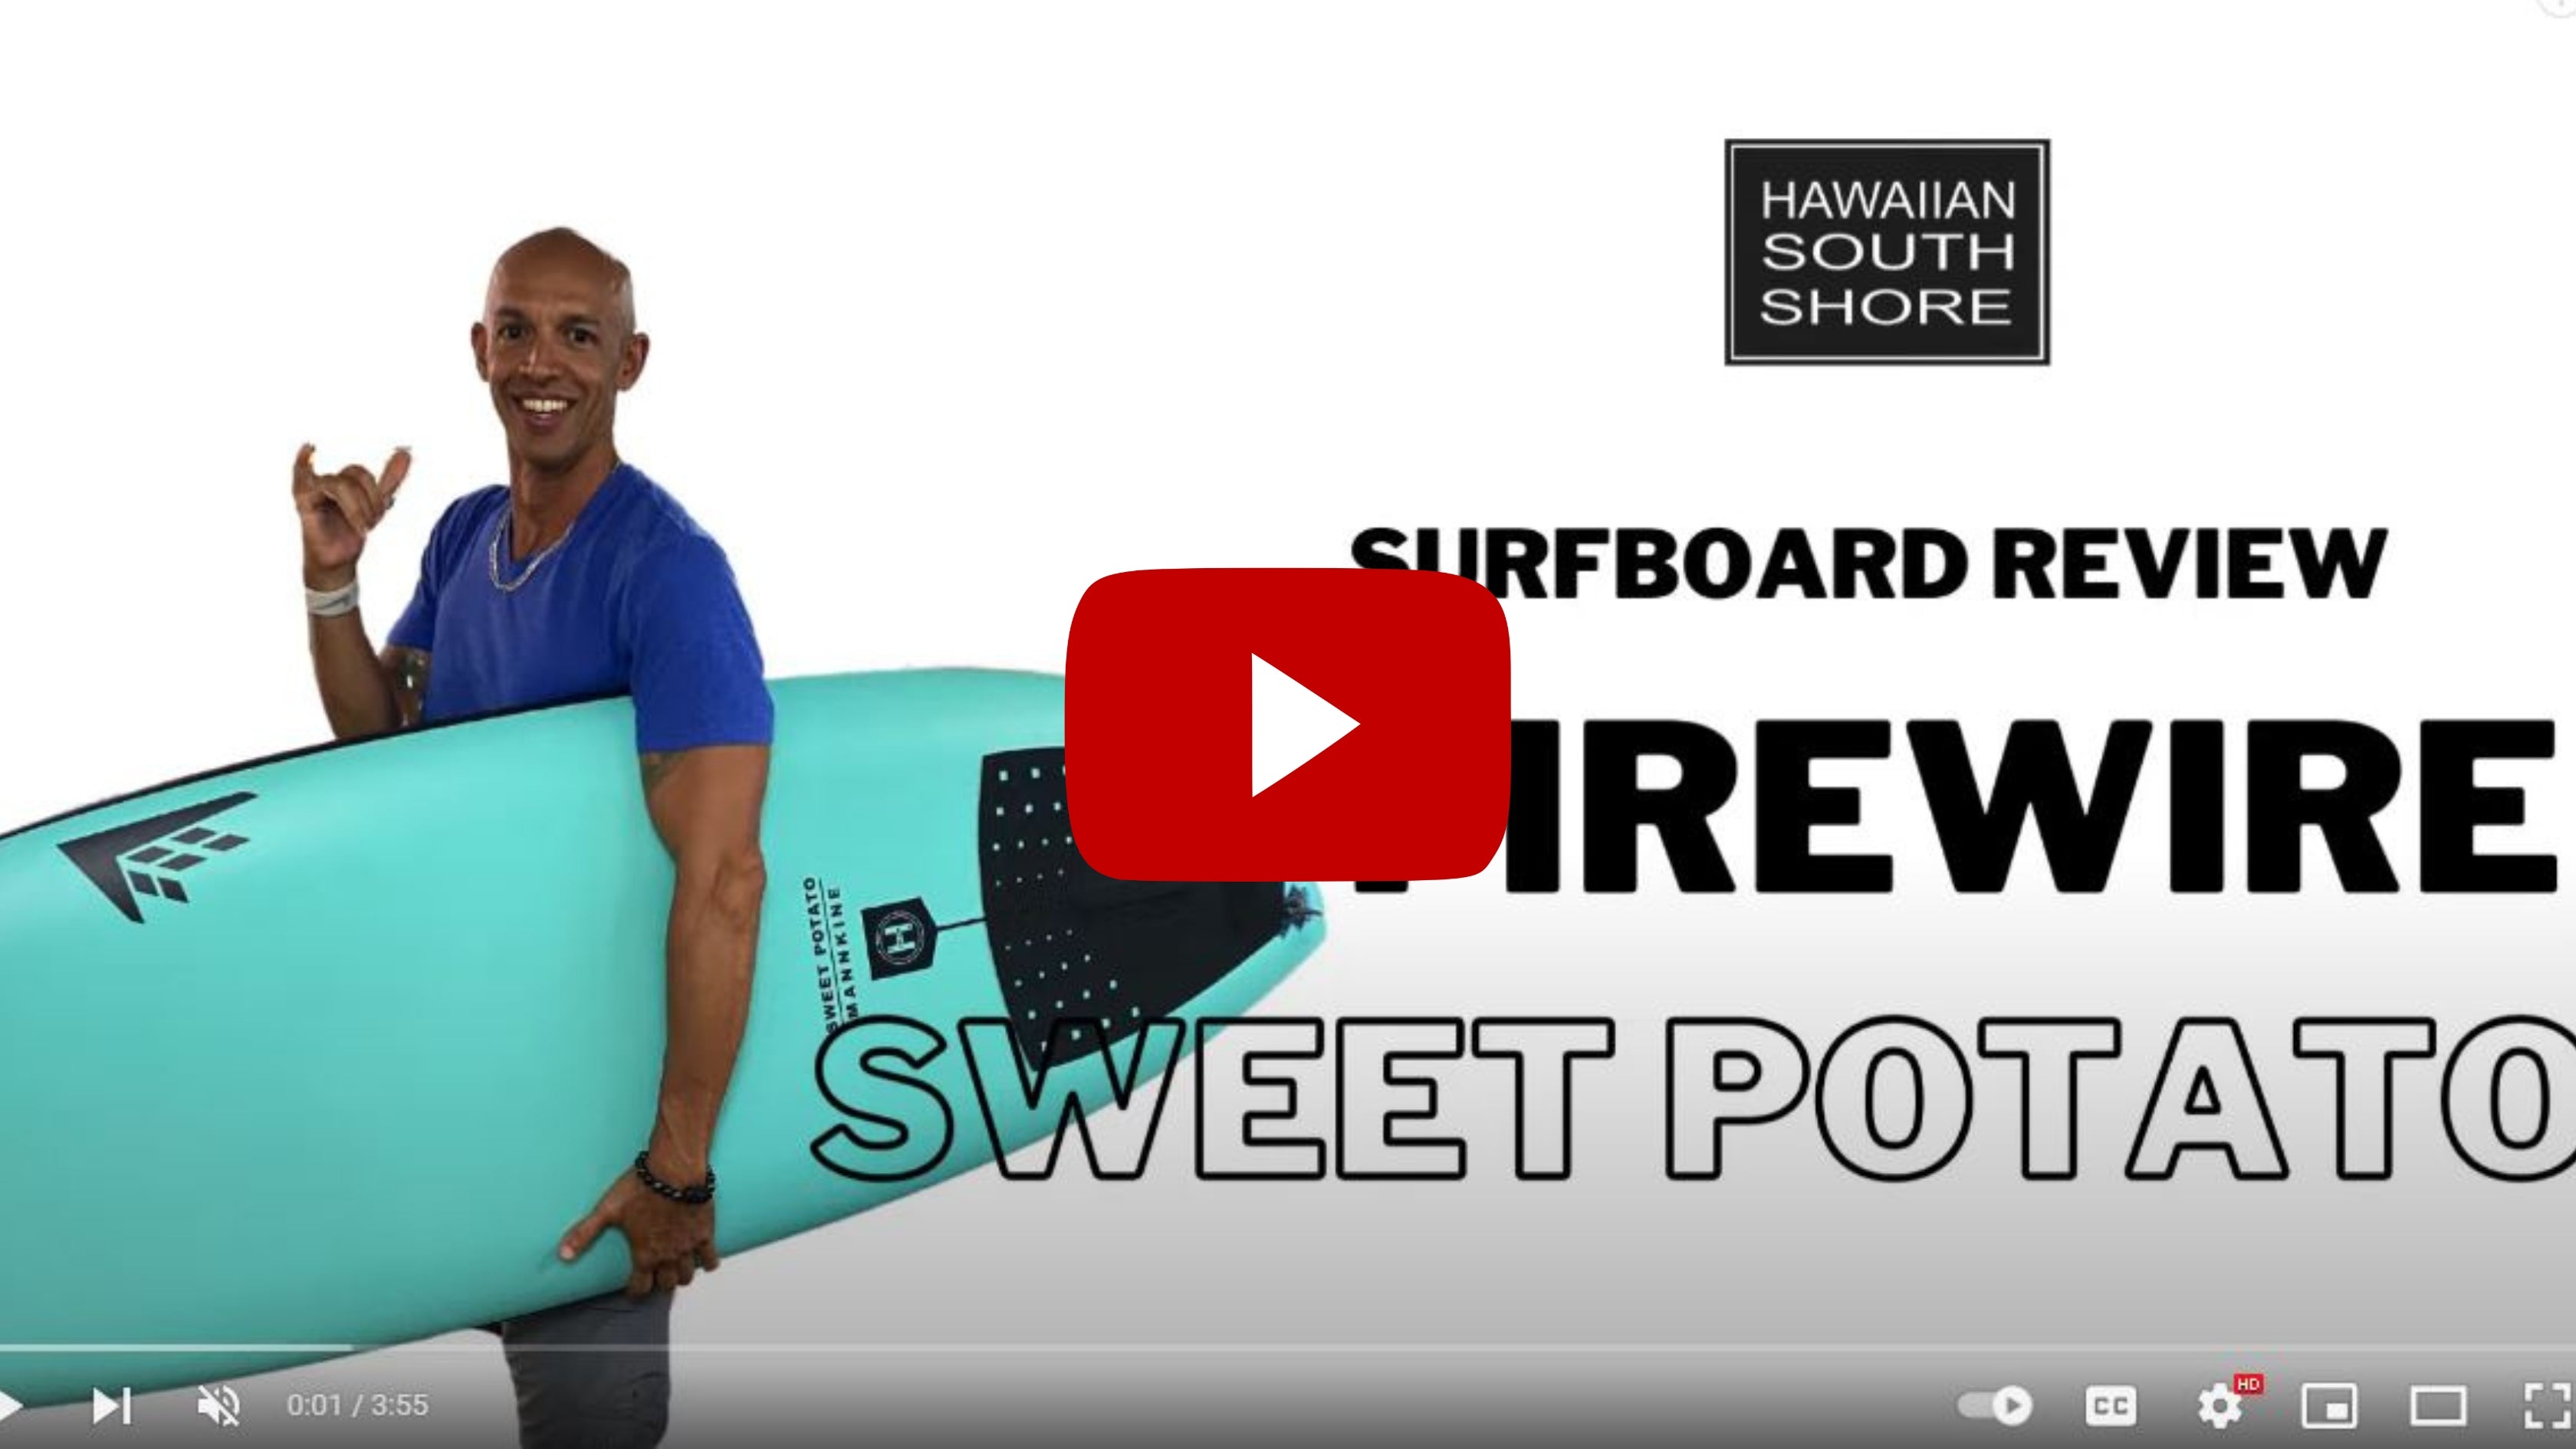 James Wilkes about FIREWIRE Sweet Potato Review